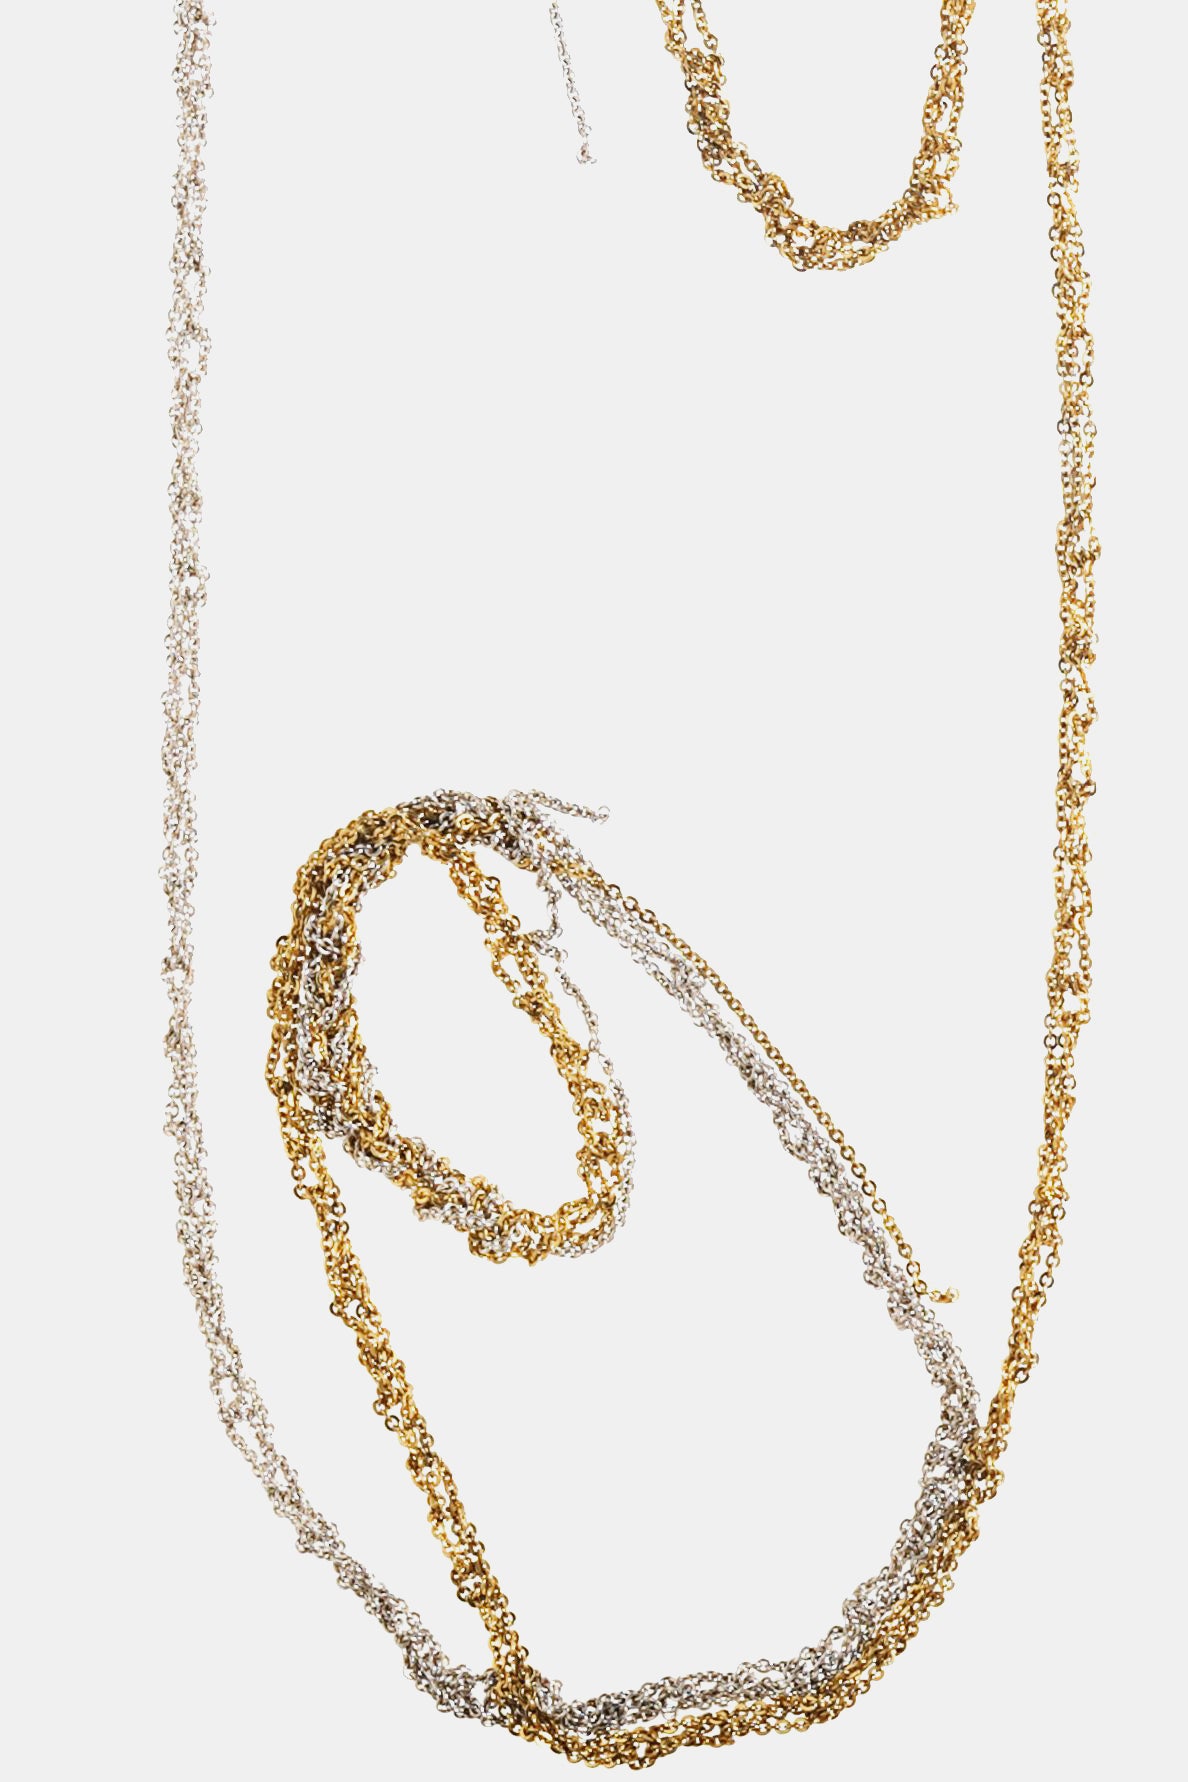 Arielle De Pinto 4-Tone Simple Necklace In Silver And Gold